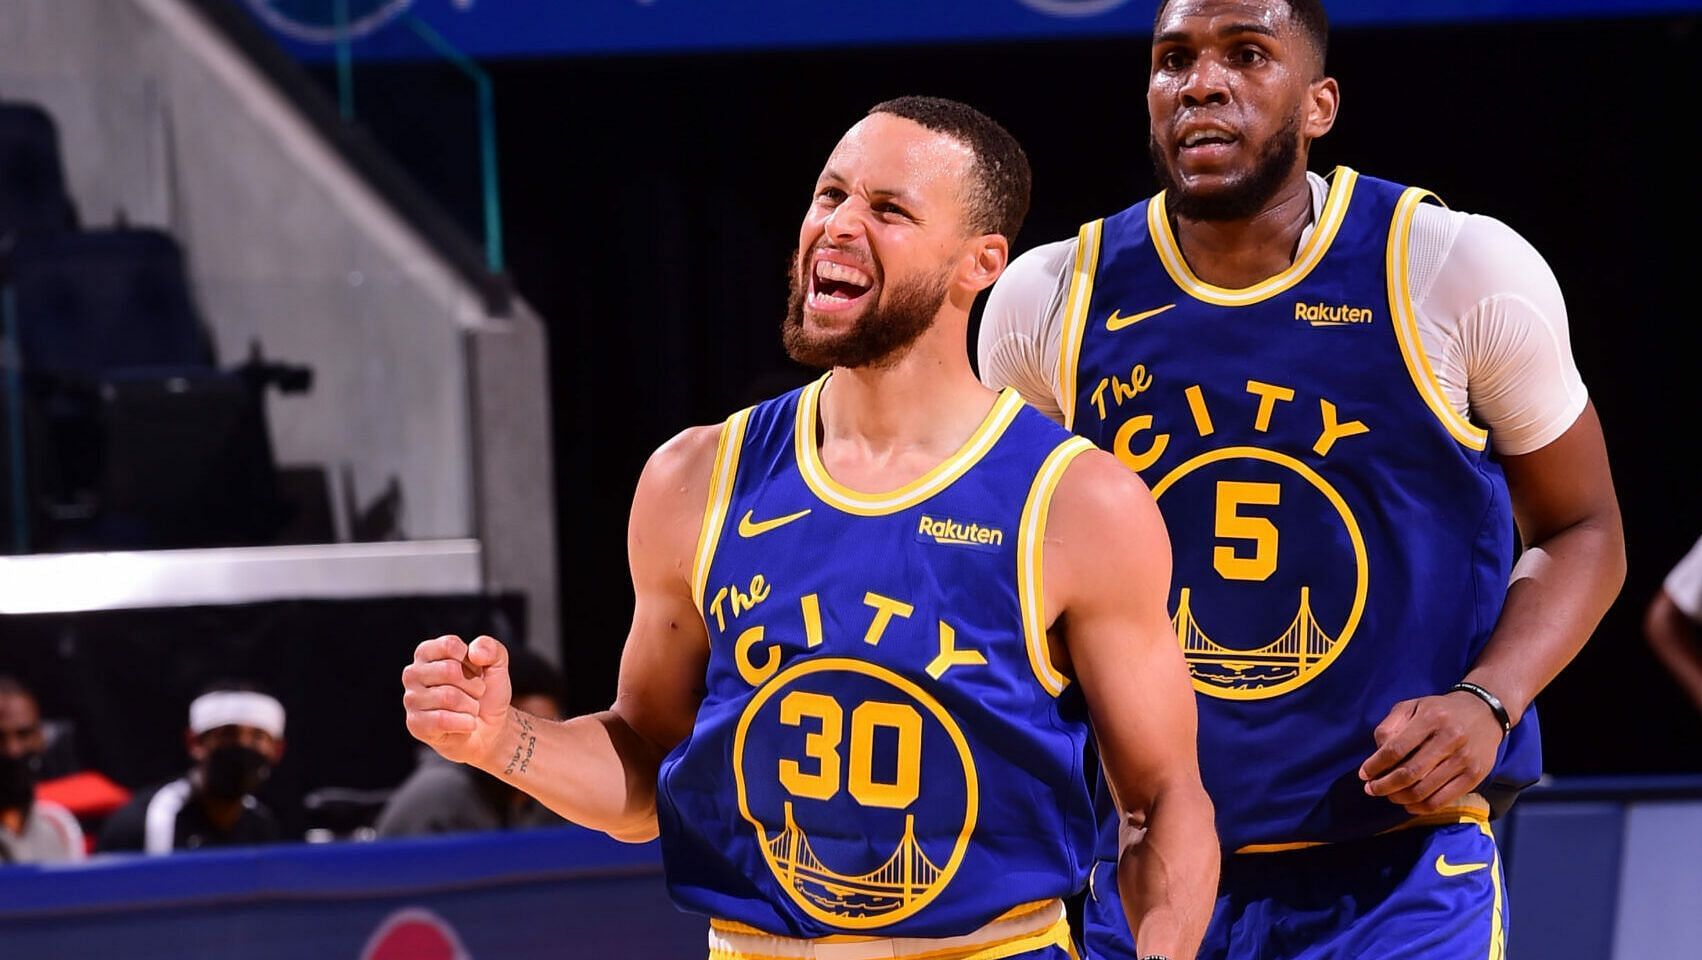 The Golden State Warriors suffered one of their worst losses this season against the Utah Jazz. [Photo: NBA.com]